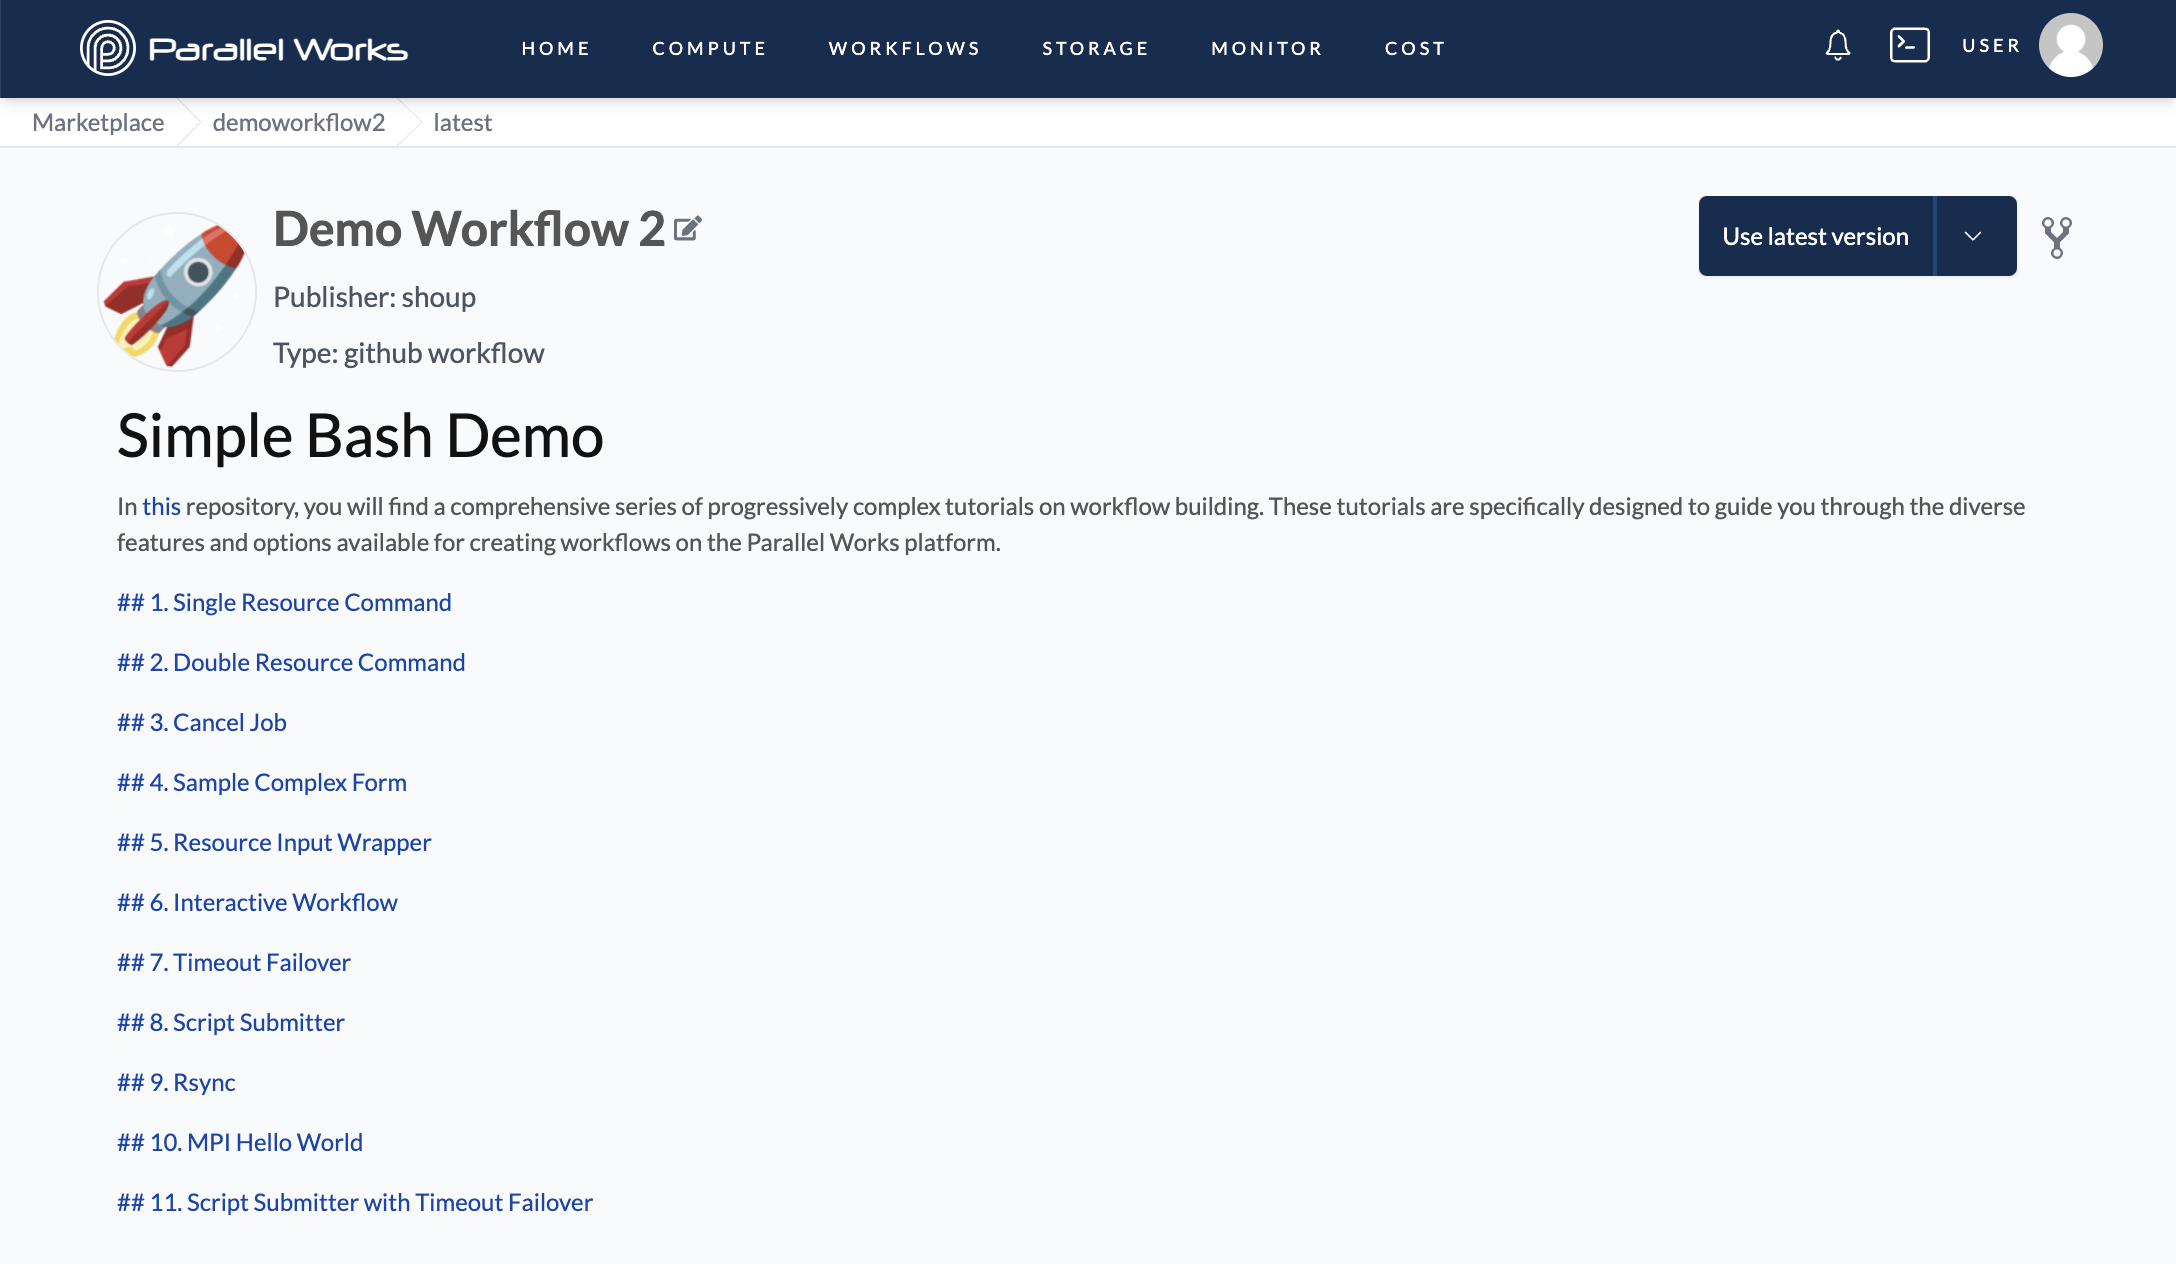 Screenshot of the new workflow&#39;s Marketplace page.